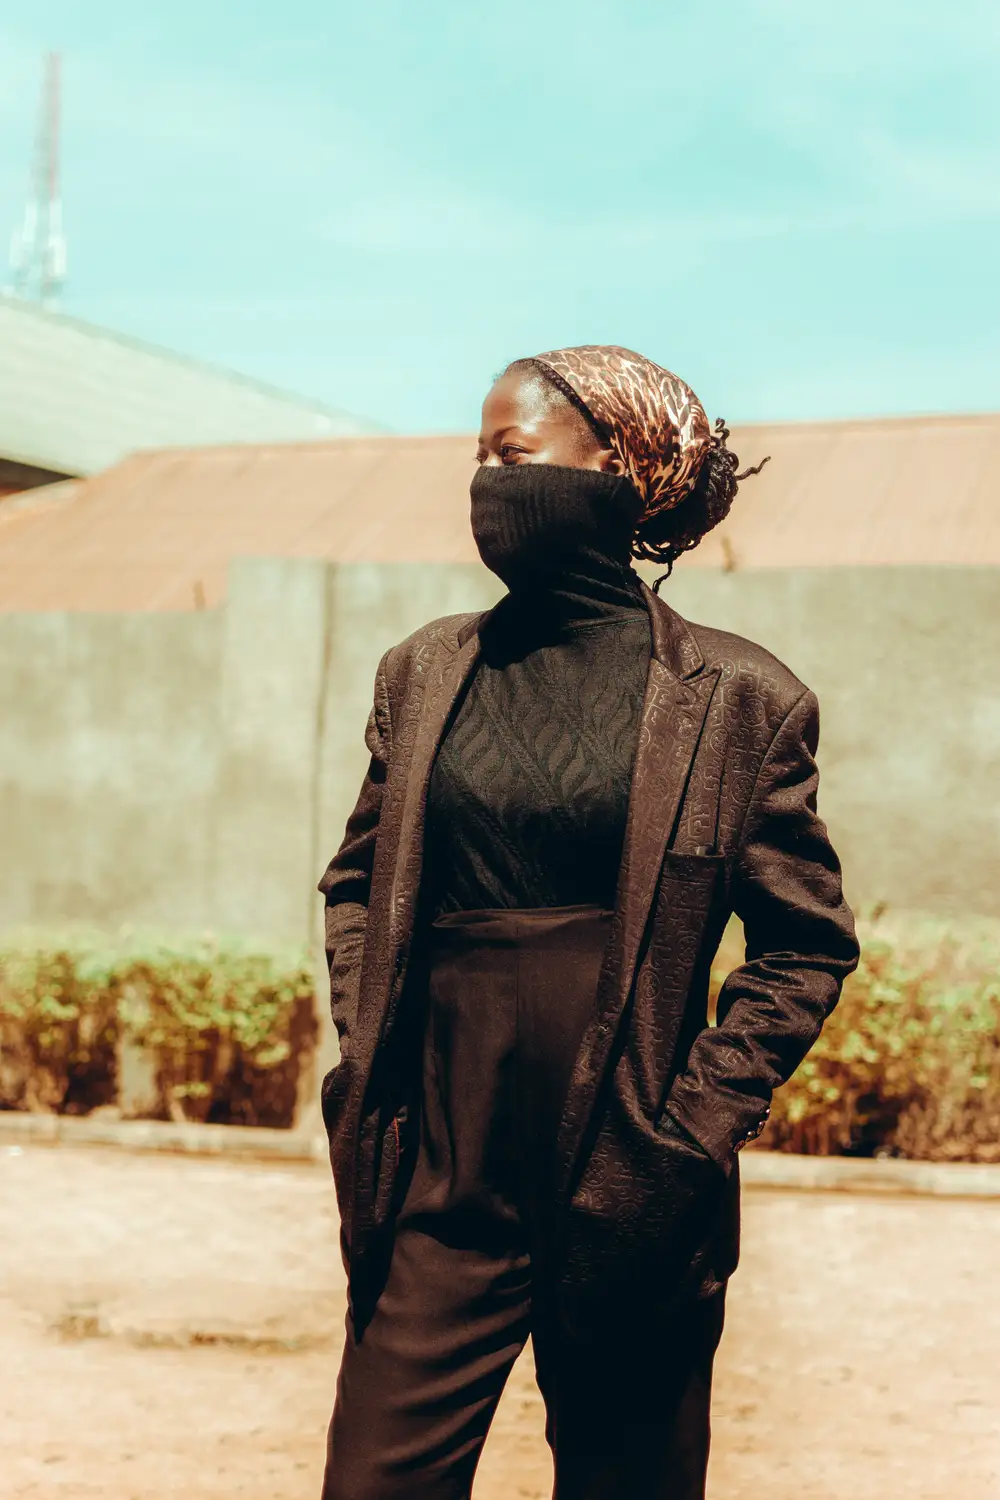 Lady wearing a brown suit with face covered Lookin sideways